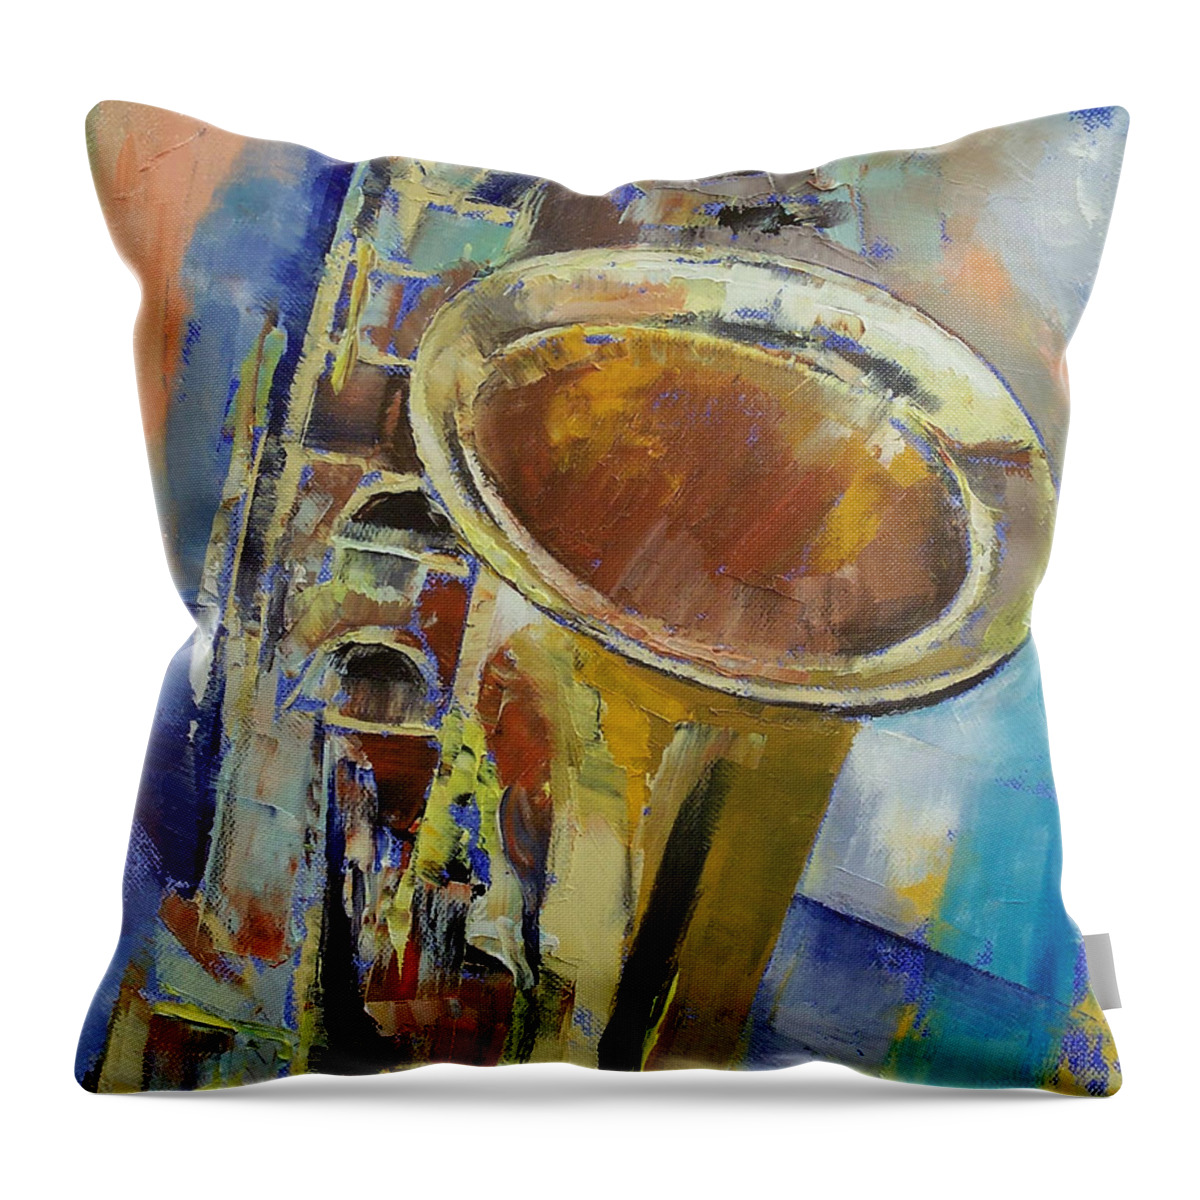 Saxophone Throw Pillow featuring the painting Saxophone by Michael Creese